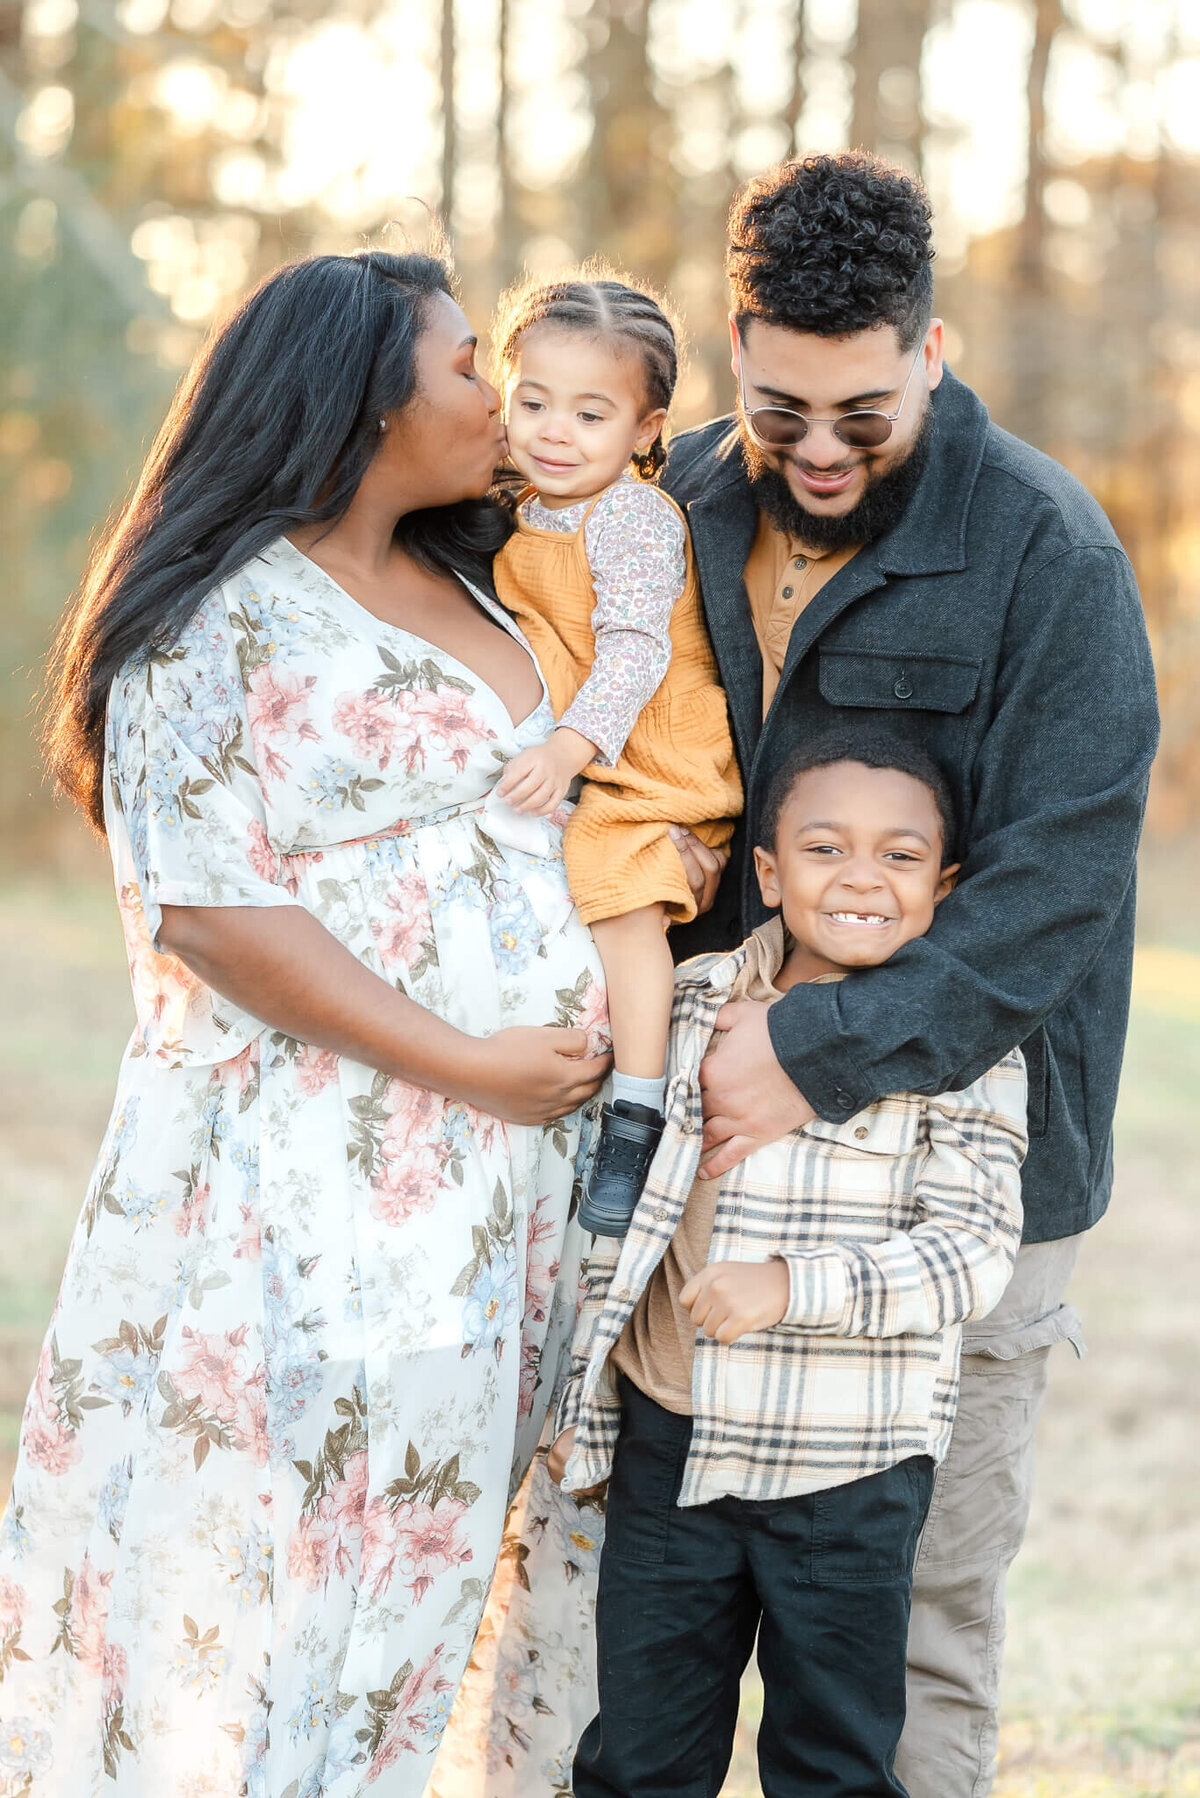 A family snuggles close during a maternity session in Chesapeake, VA. Everyone has their arms around each other and the pregnant mama kisses her toddler.